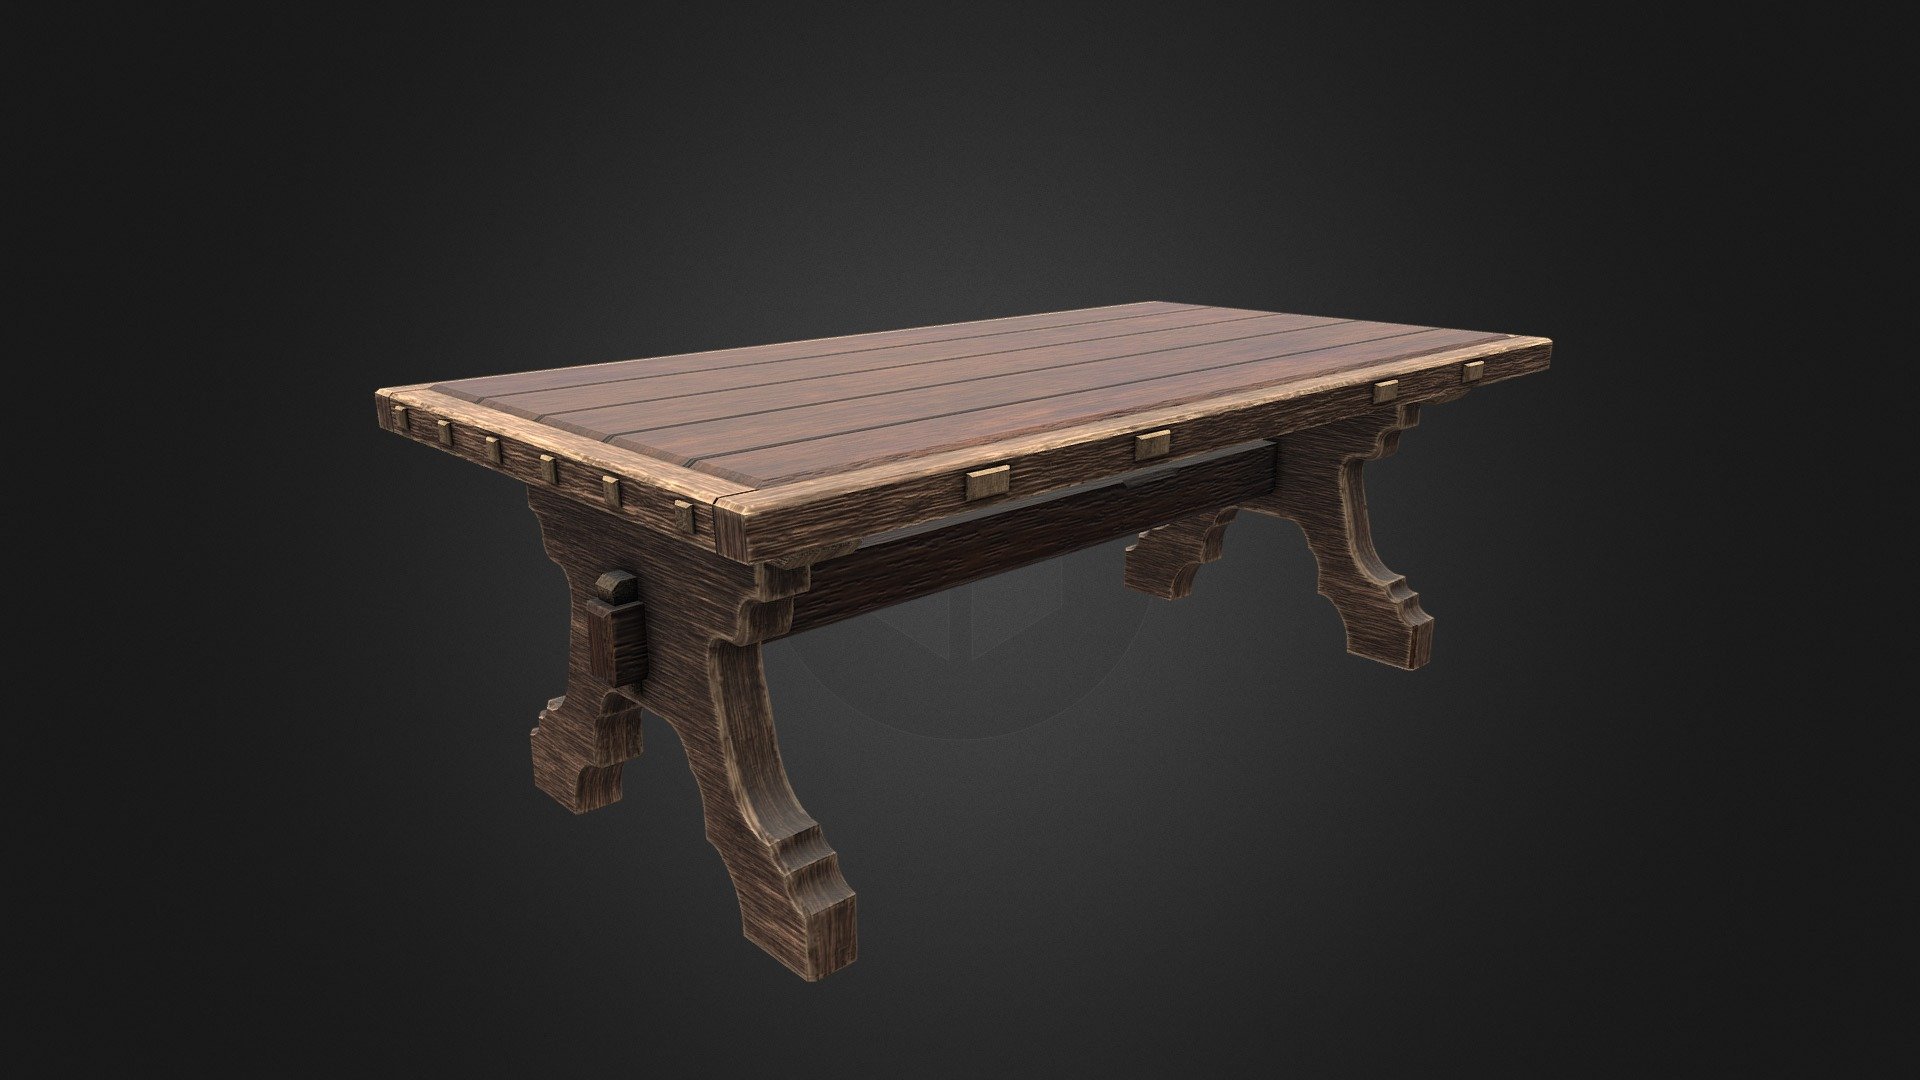 Simple  wooden table for scene or game project.
(game ready asset)

Rev 1.1 (reuploaded to correct a glitch to the mesh been empt)

Tris: 4.538




Textures 2k

PBR Material.

No internal or hidden geometry.

Hand painted.

Free for use on any personal or commercial project.

If you need a personal customization please let me know in the comments.
Don't forget to check out our other uploads.

You can support our work purchasing one of our items.
Link in the bio 3d model